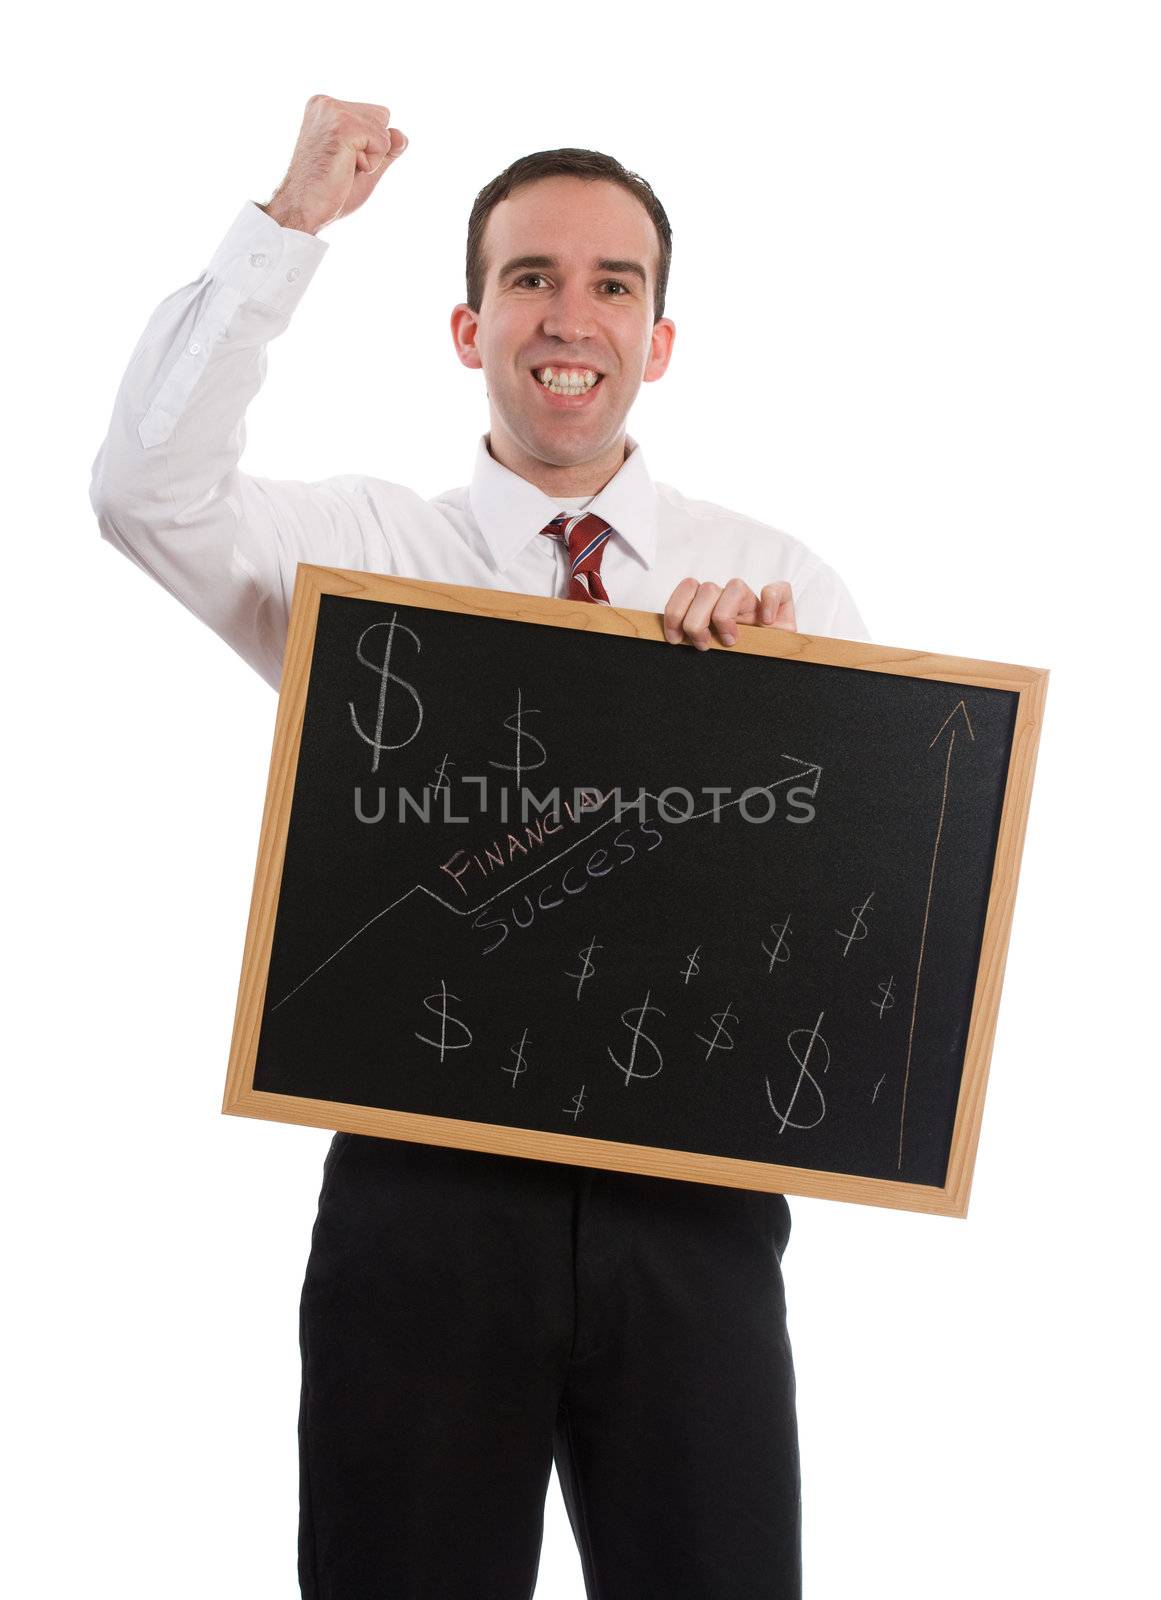 A new business owner is happy he is in the black, isolated against a white background